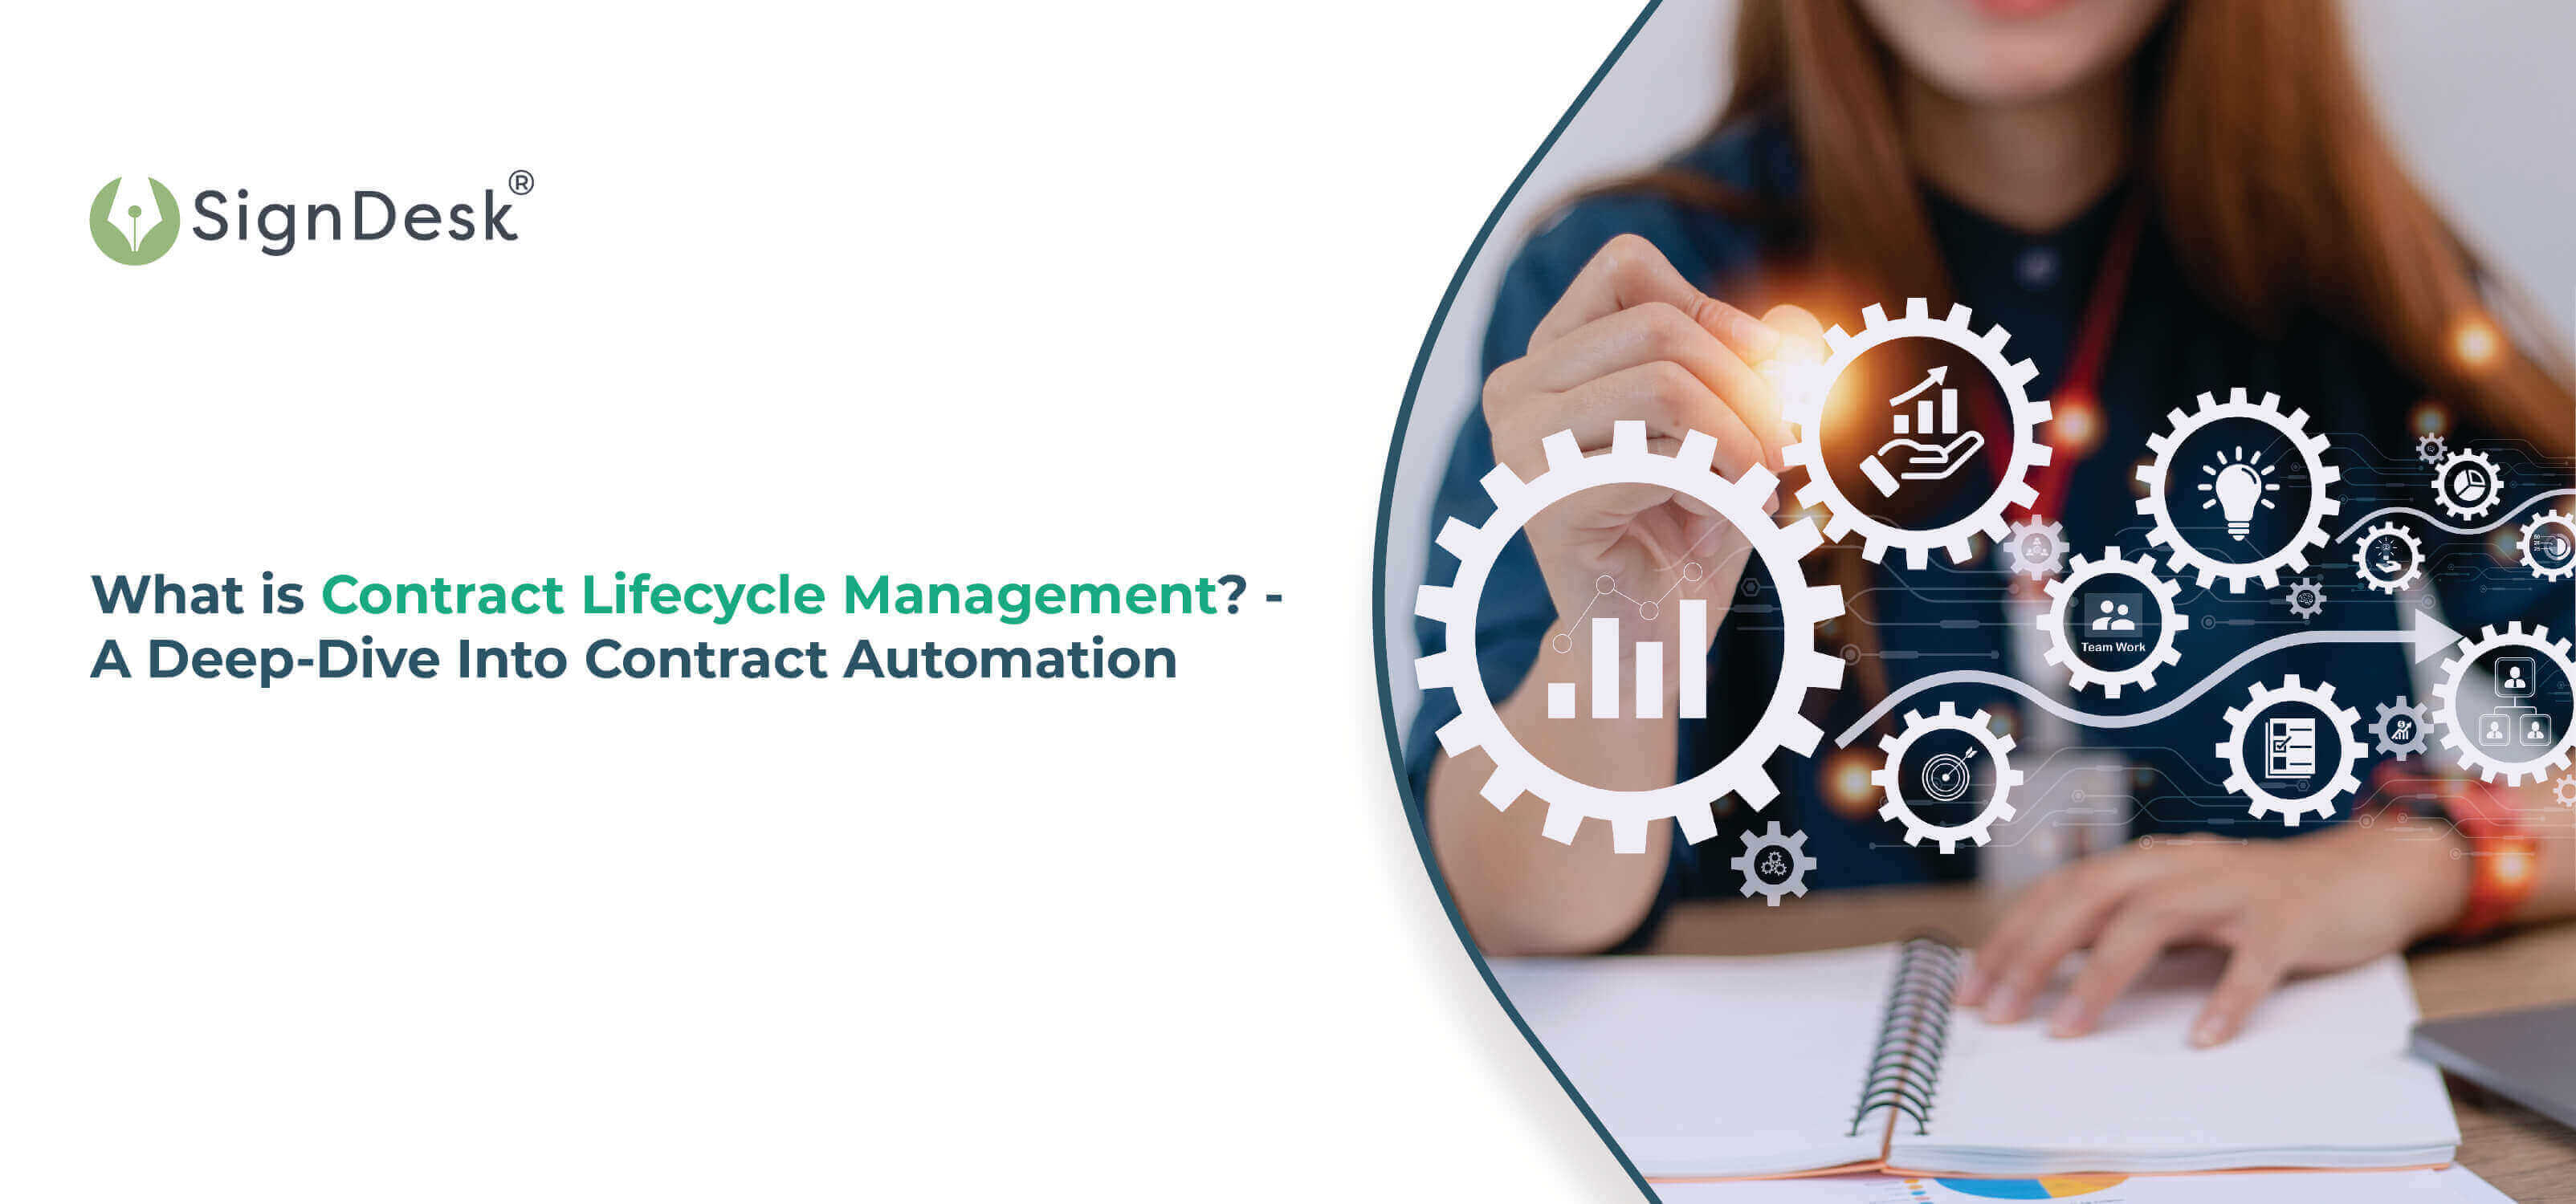 What Is Contract Lifecycle Management? - A Deep-Dive Into Contract Automation